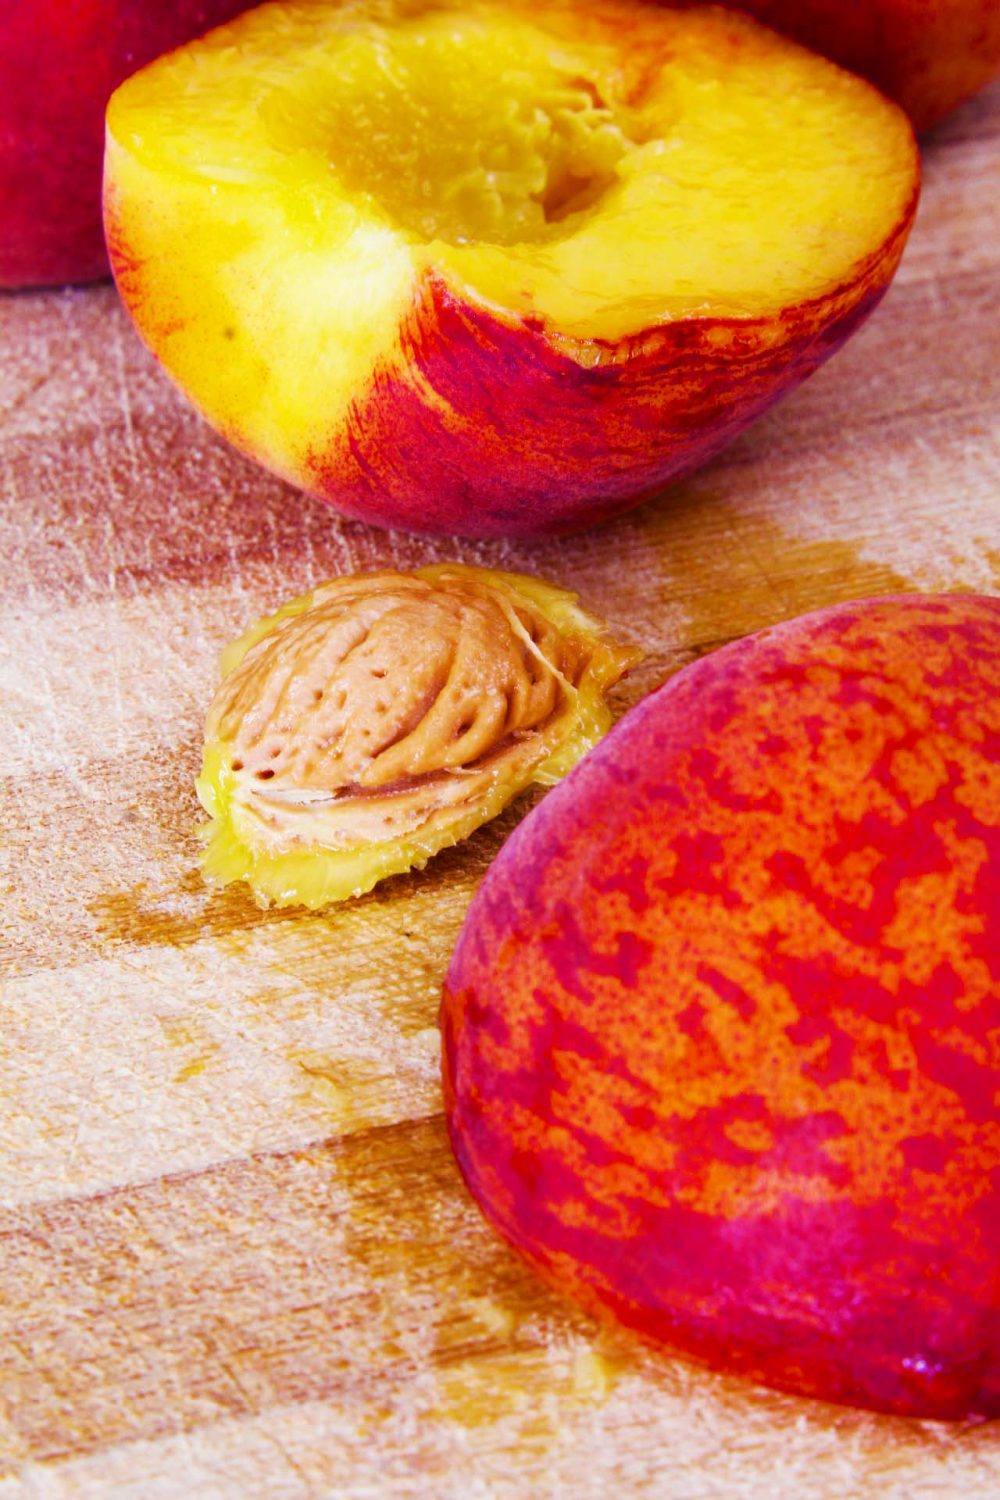 How to pit a peach easily